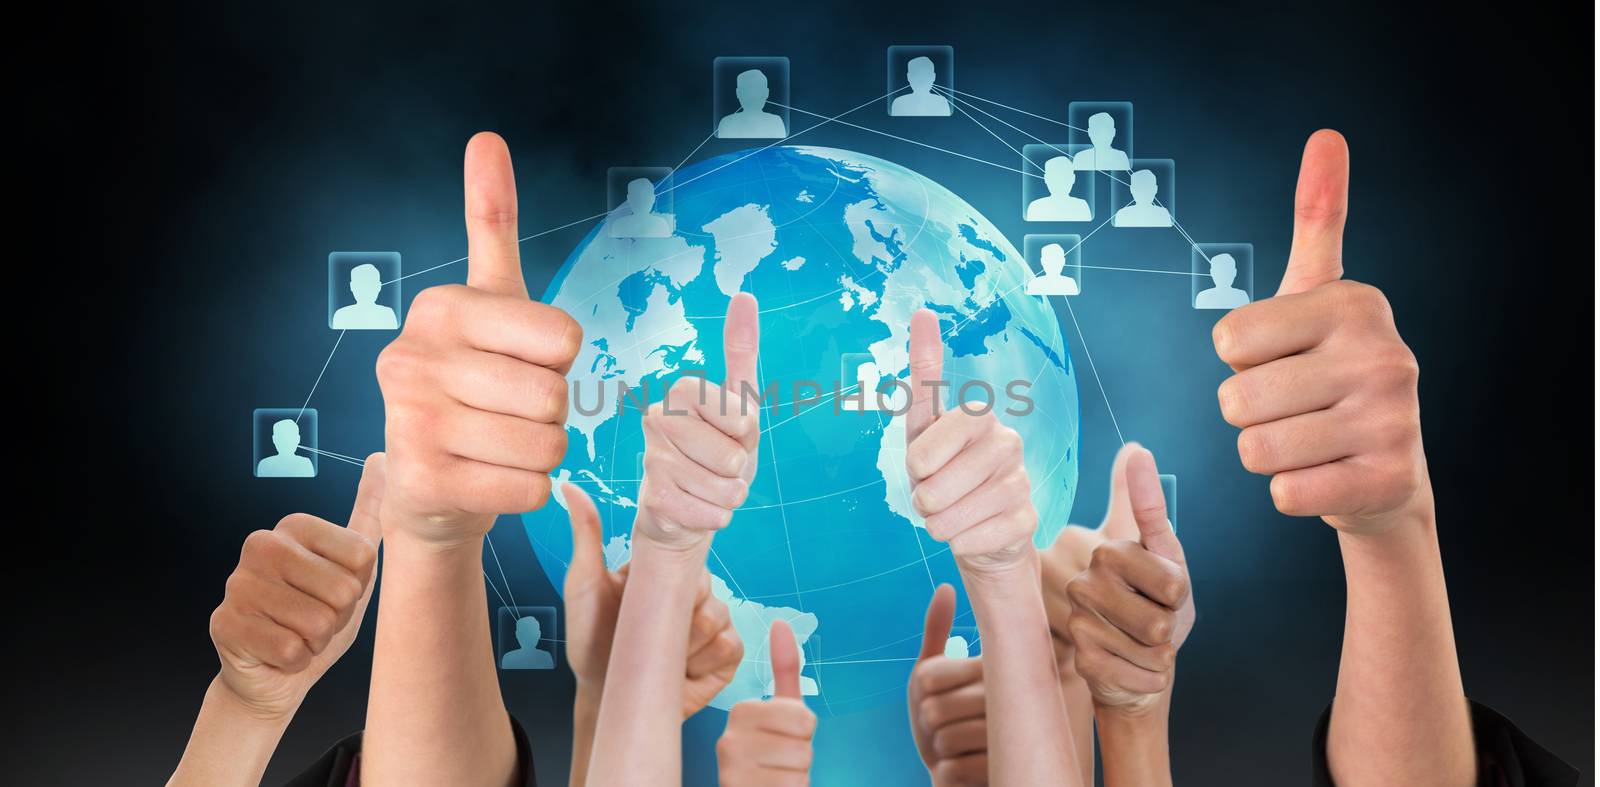 Hands showing thumbs up against futuristic technology interface